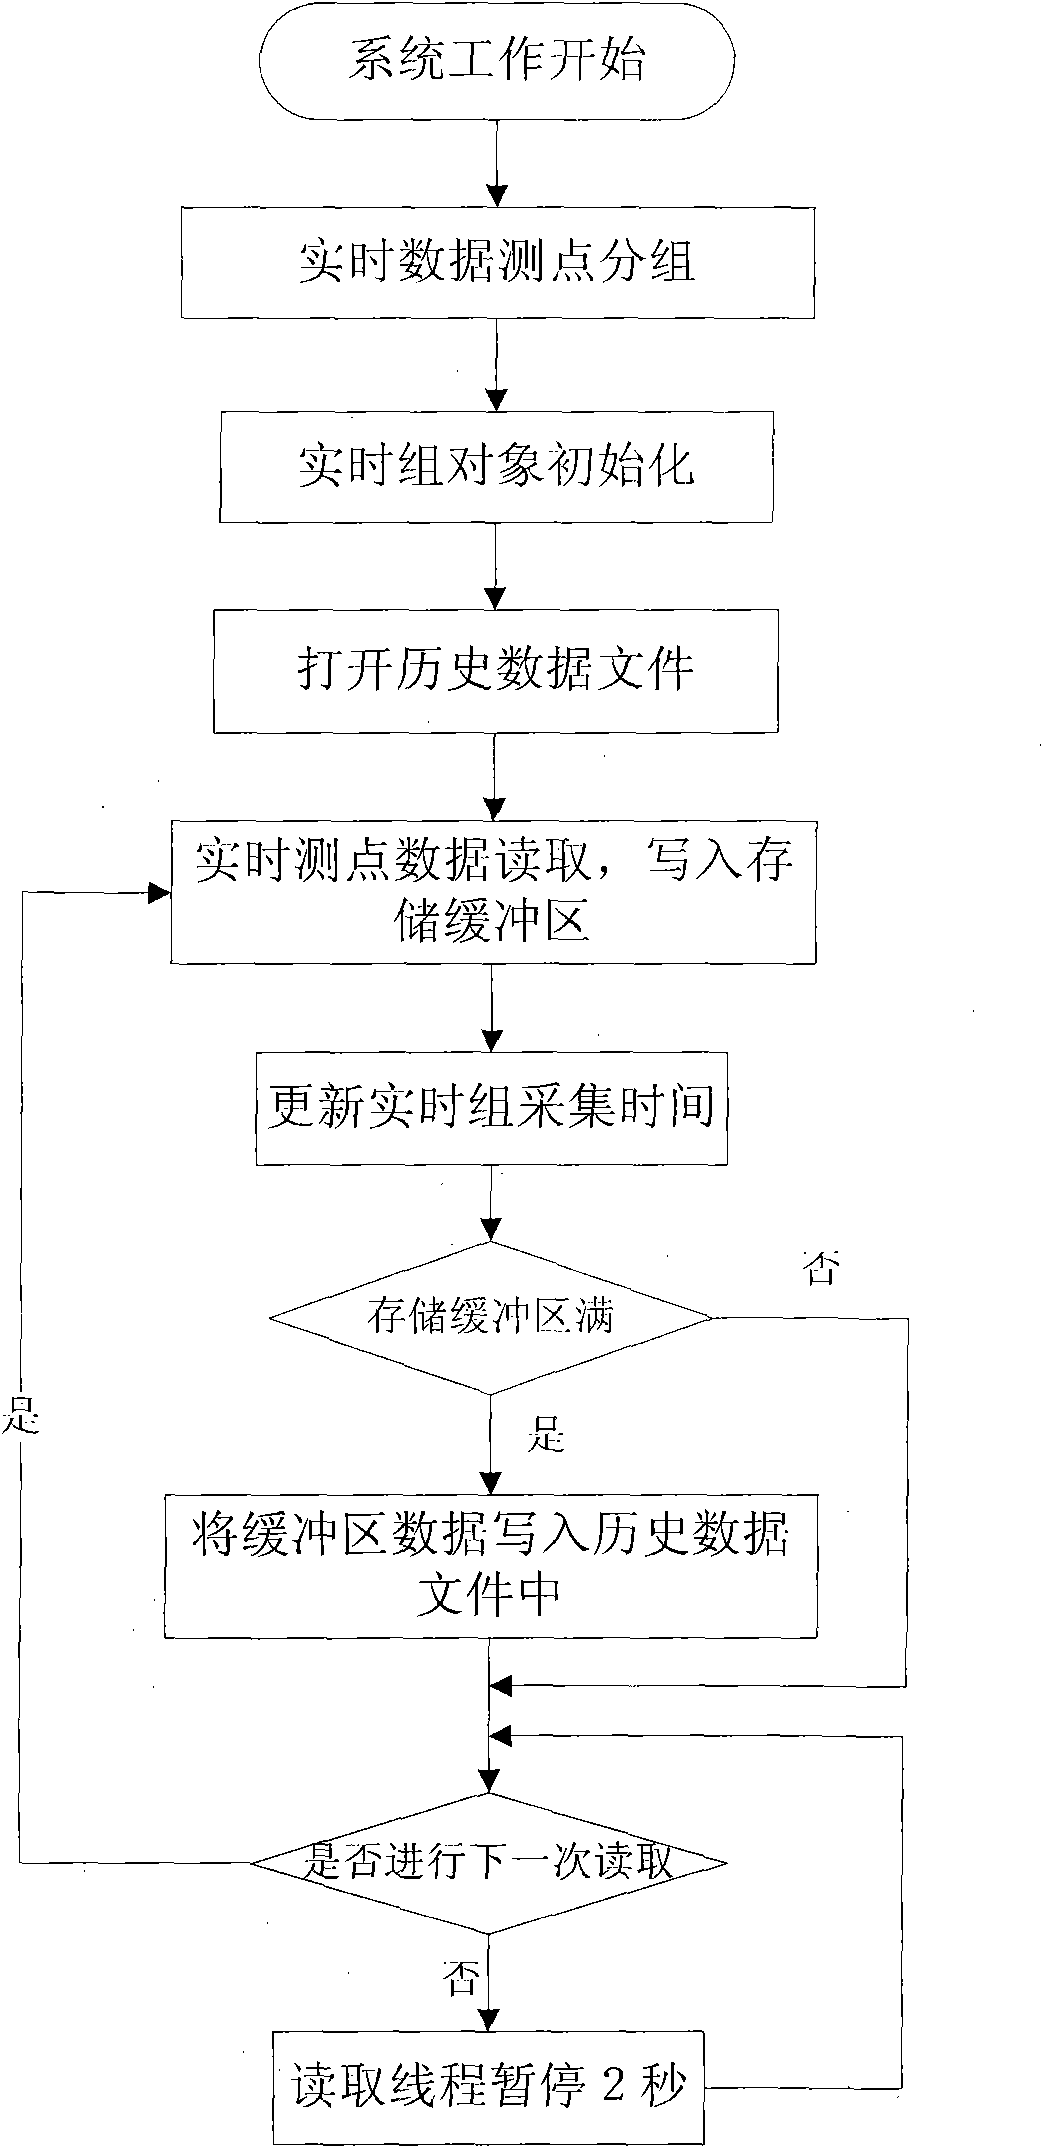 Method for memorizing real time measure point data facing quick review